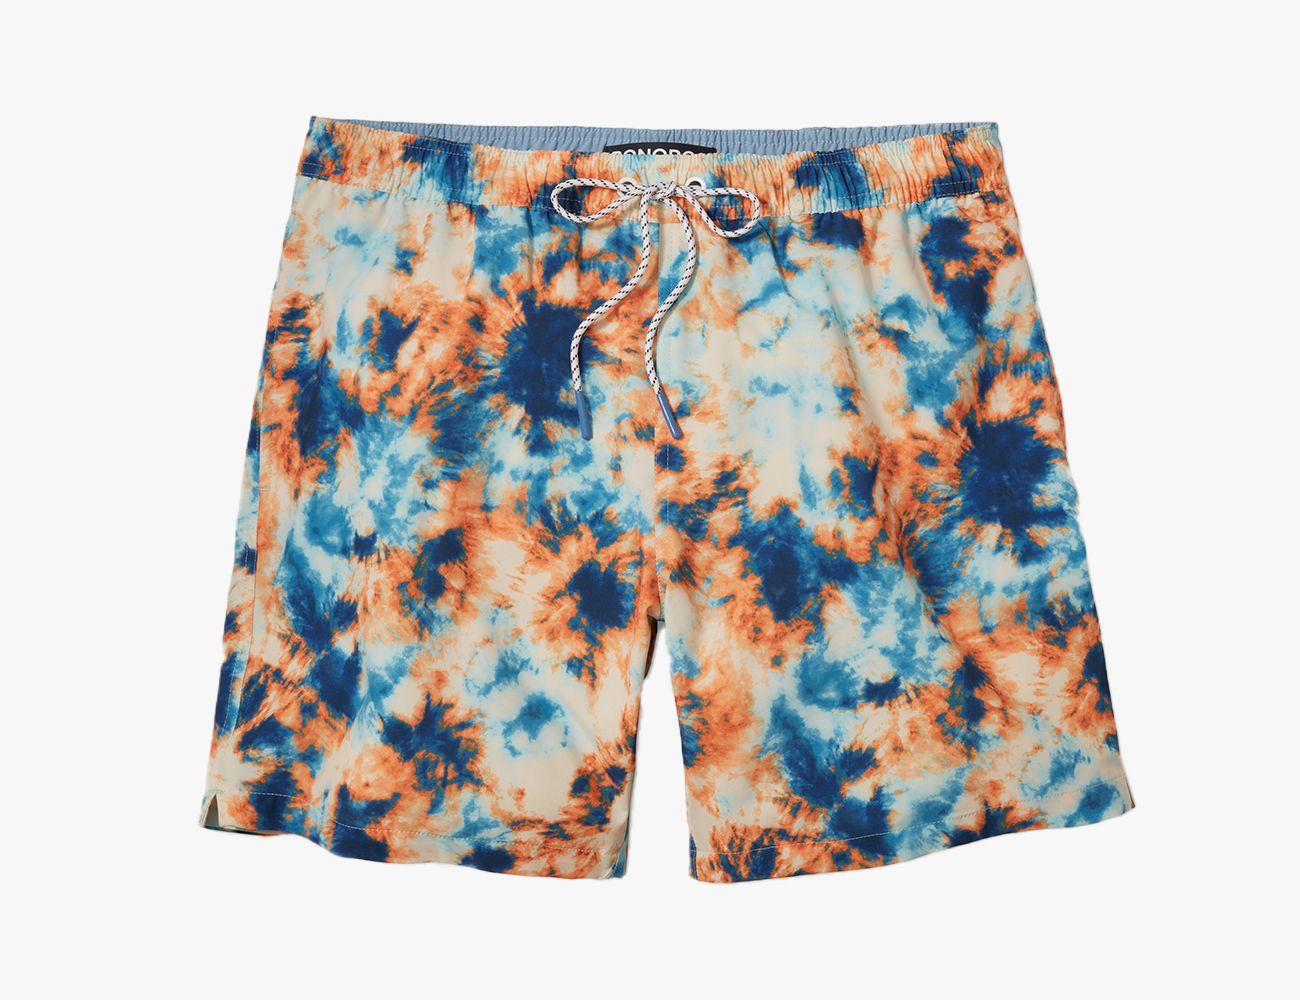 Details about   NWT Jr Swim Trunks With Pockets Org $40 On Sale $19.99 Sz 2 4 5-6, 3 